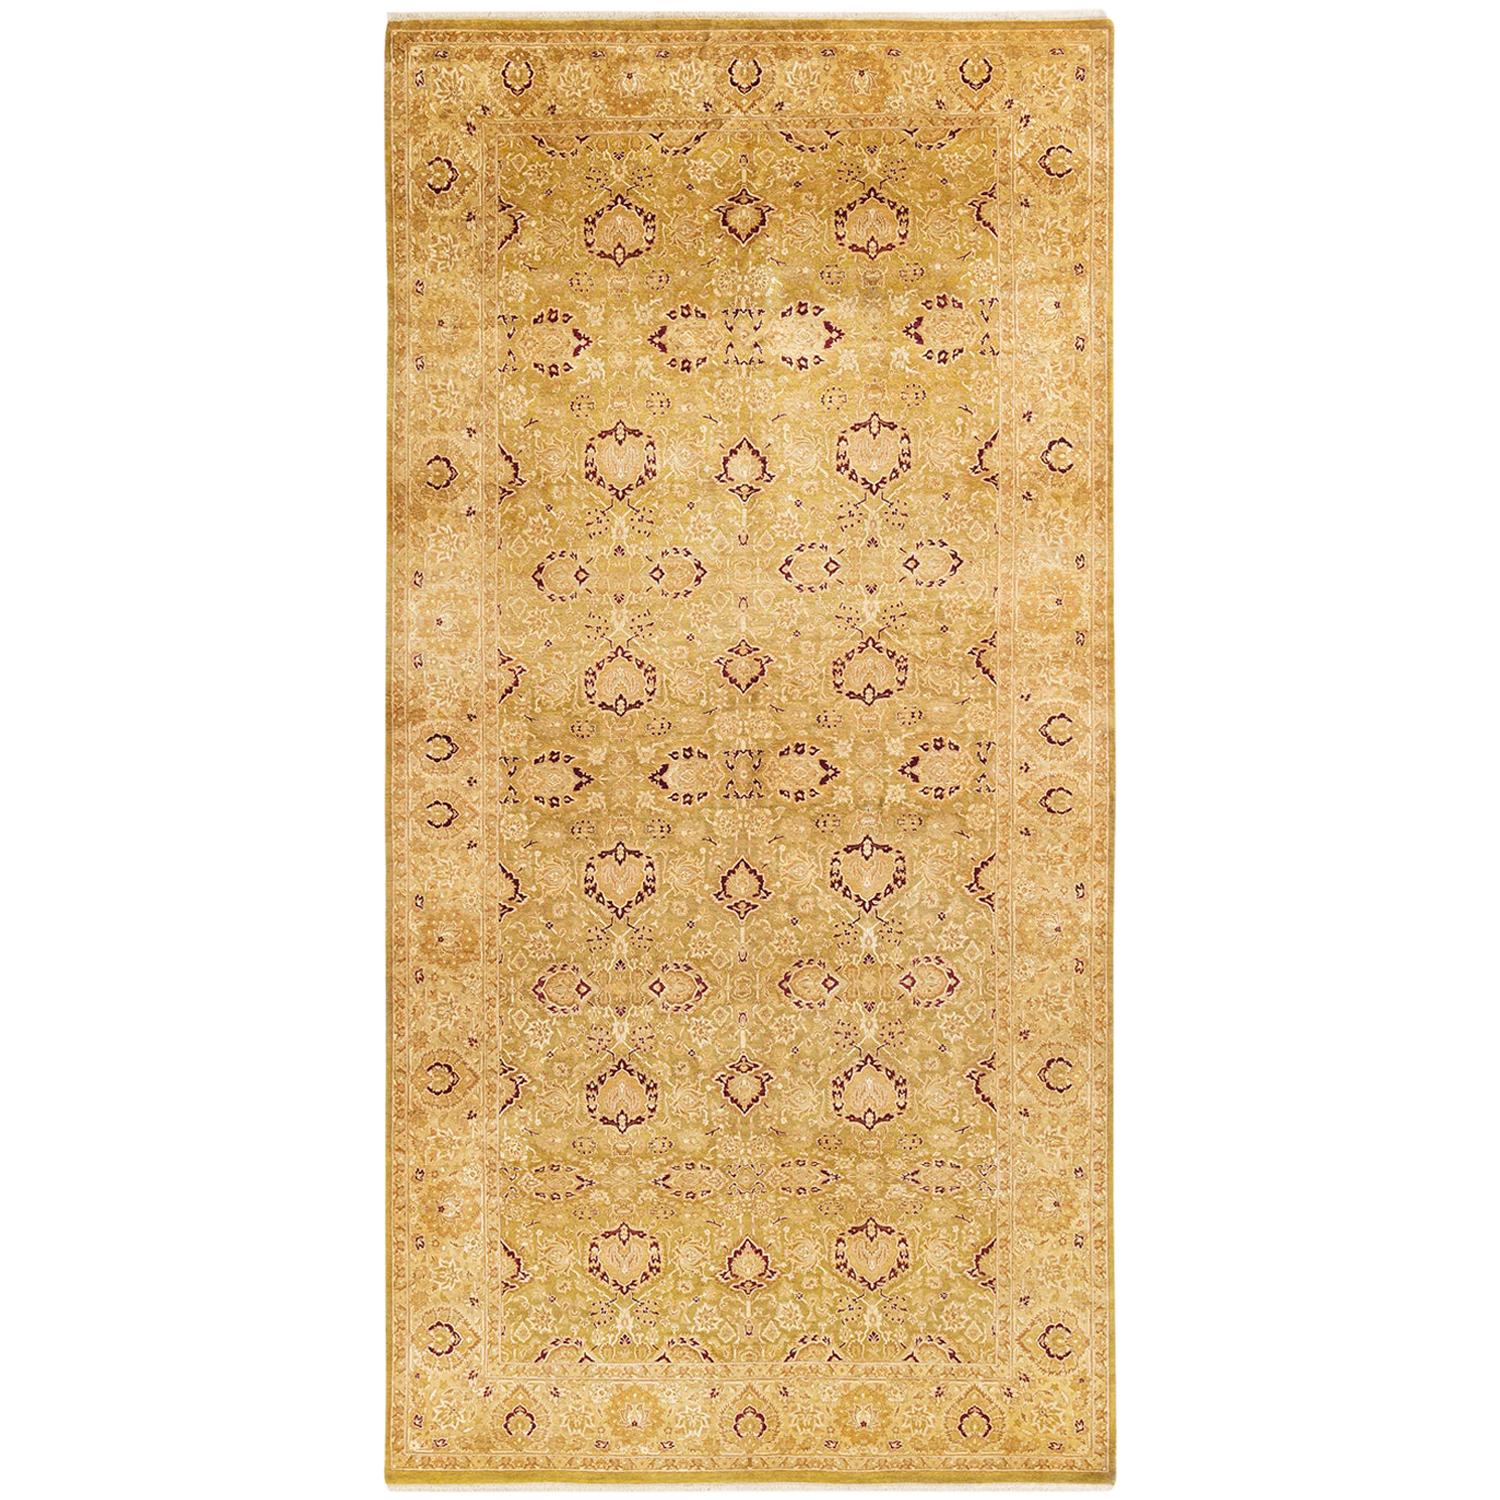 Mogul, One-of-a-Kind Hand-Knotted Runner, Green